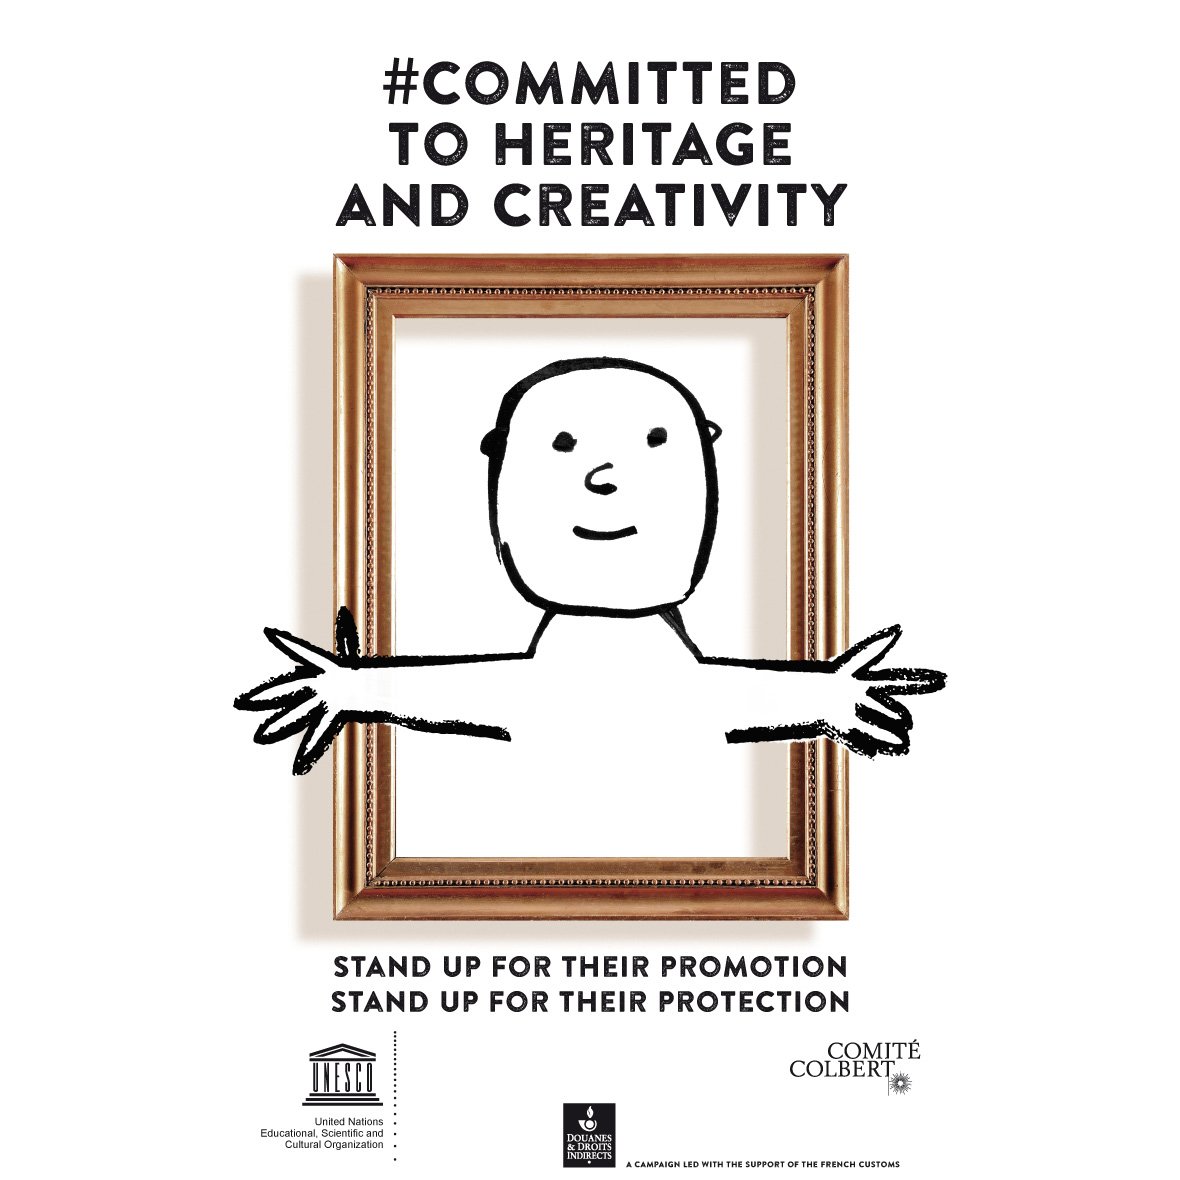 #PierreHerme joins @Unesco and the #ComitéColbert to support #heritageandcreativity bit.ly/22JPtMh